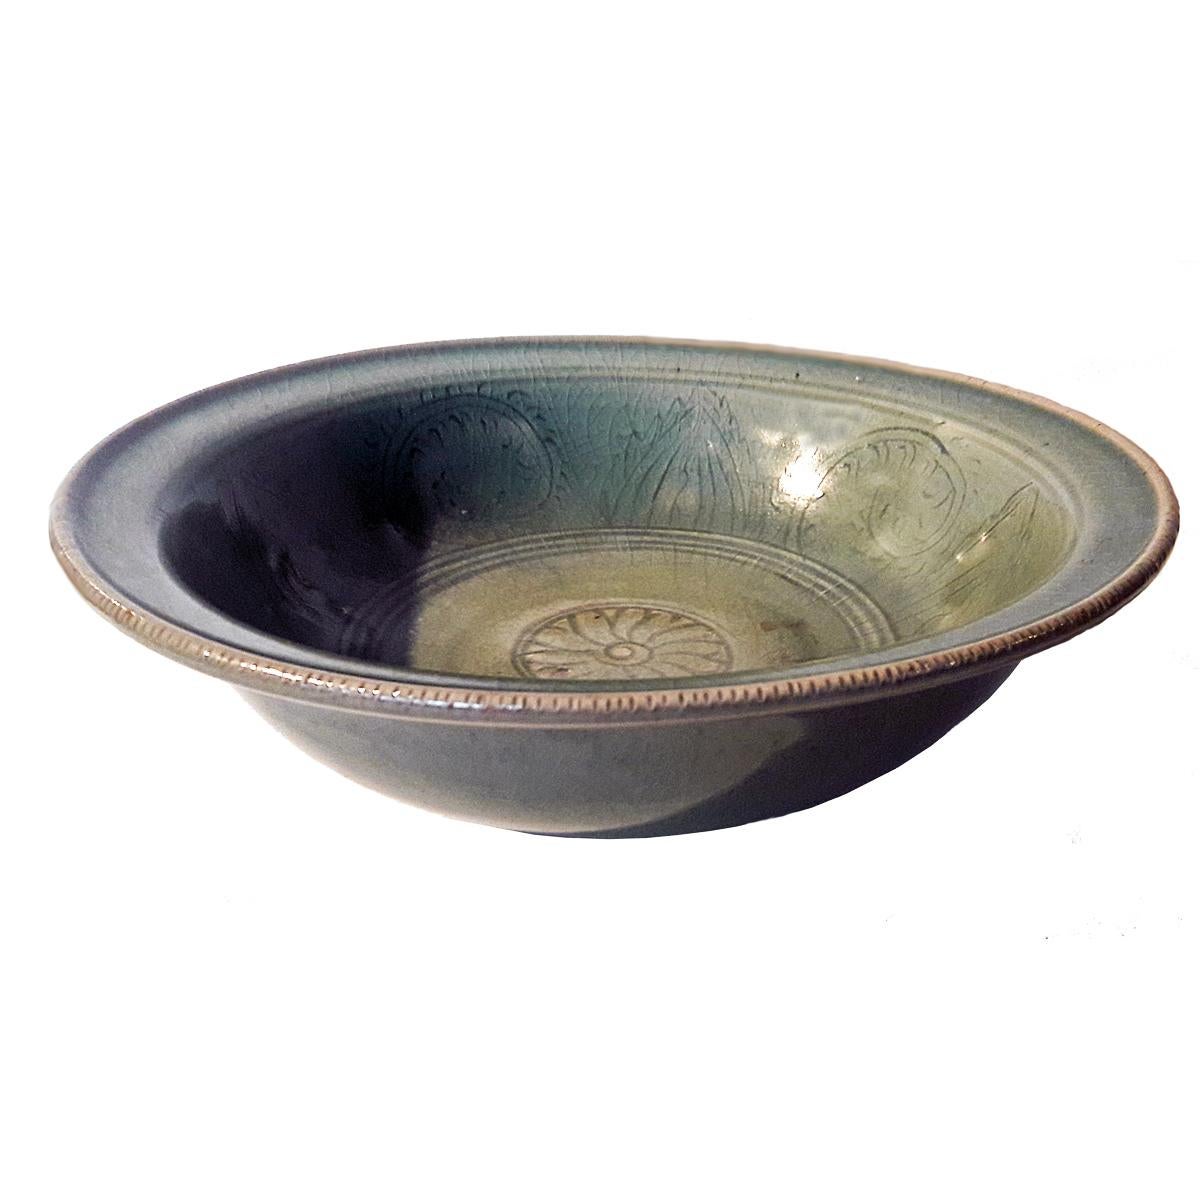 A Thai Celadon plate, with traditional jade-color, crackled glaze, circa 1890. Lotus decoration in the center and inside.